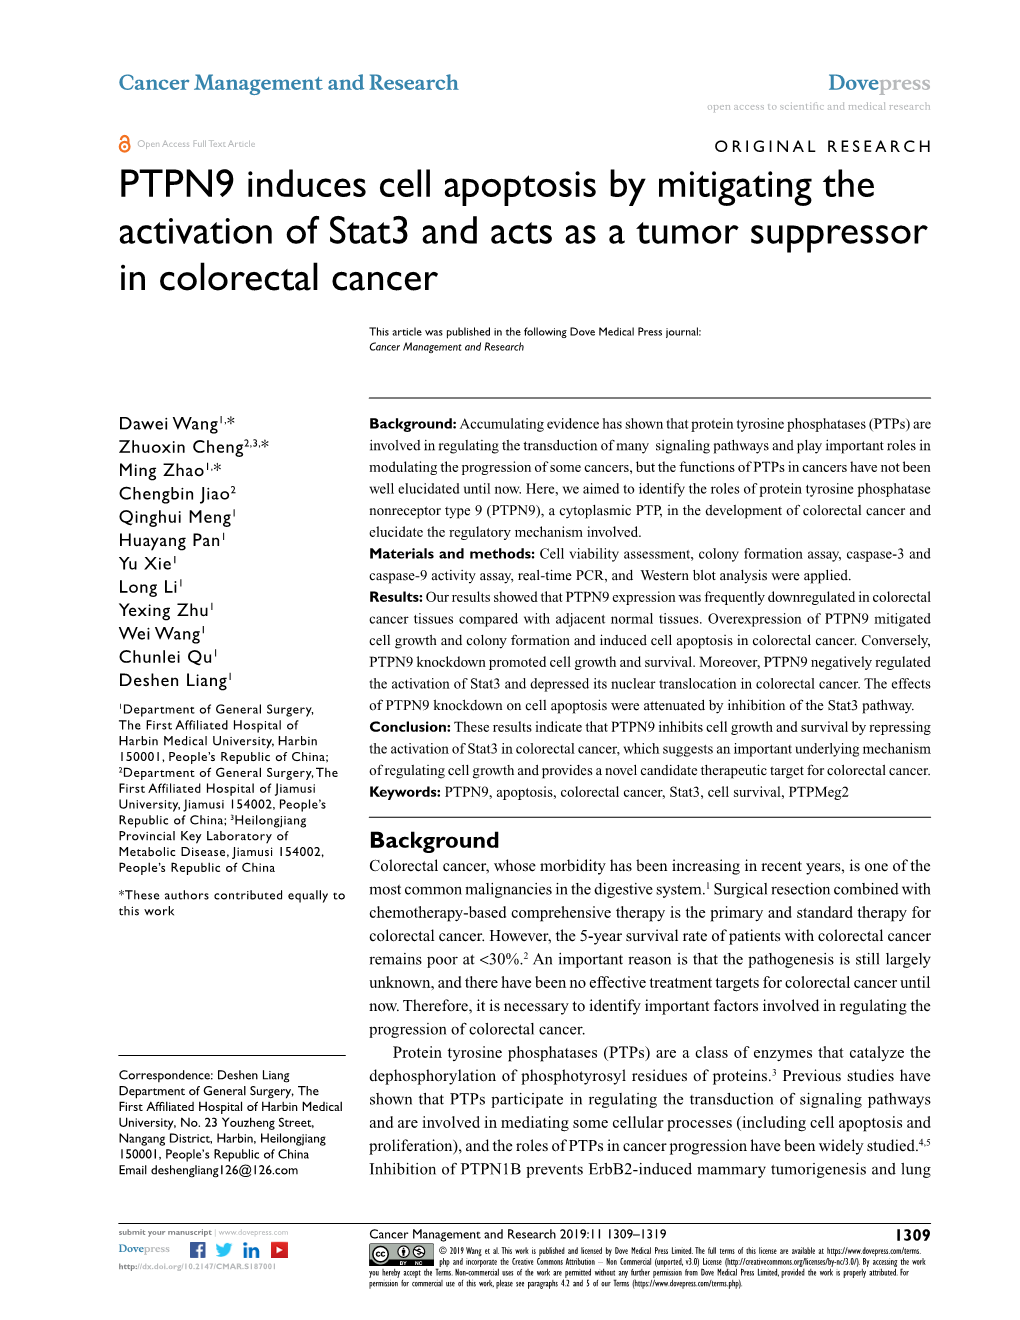 PTPN9 Induces Cell Apoptosis by Mitigating the Activation of Stat3 and Acts As a Tumor Suppressor in Colorectal Cancer